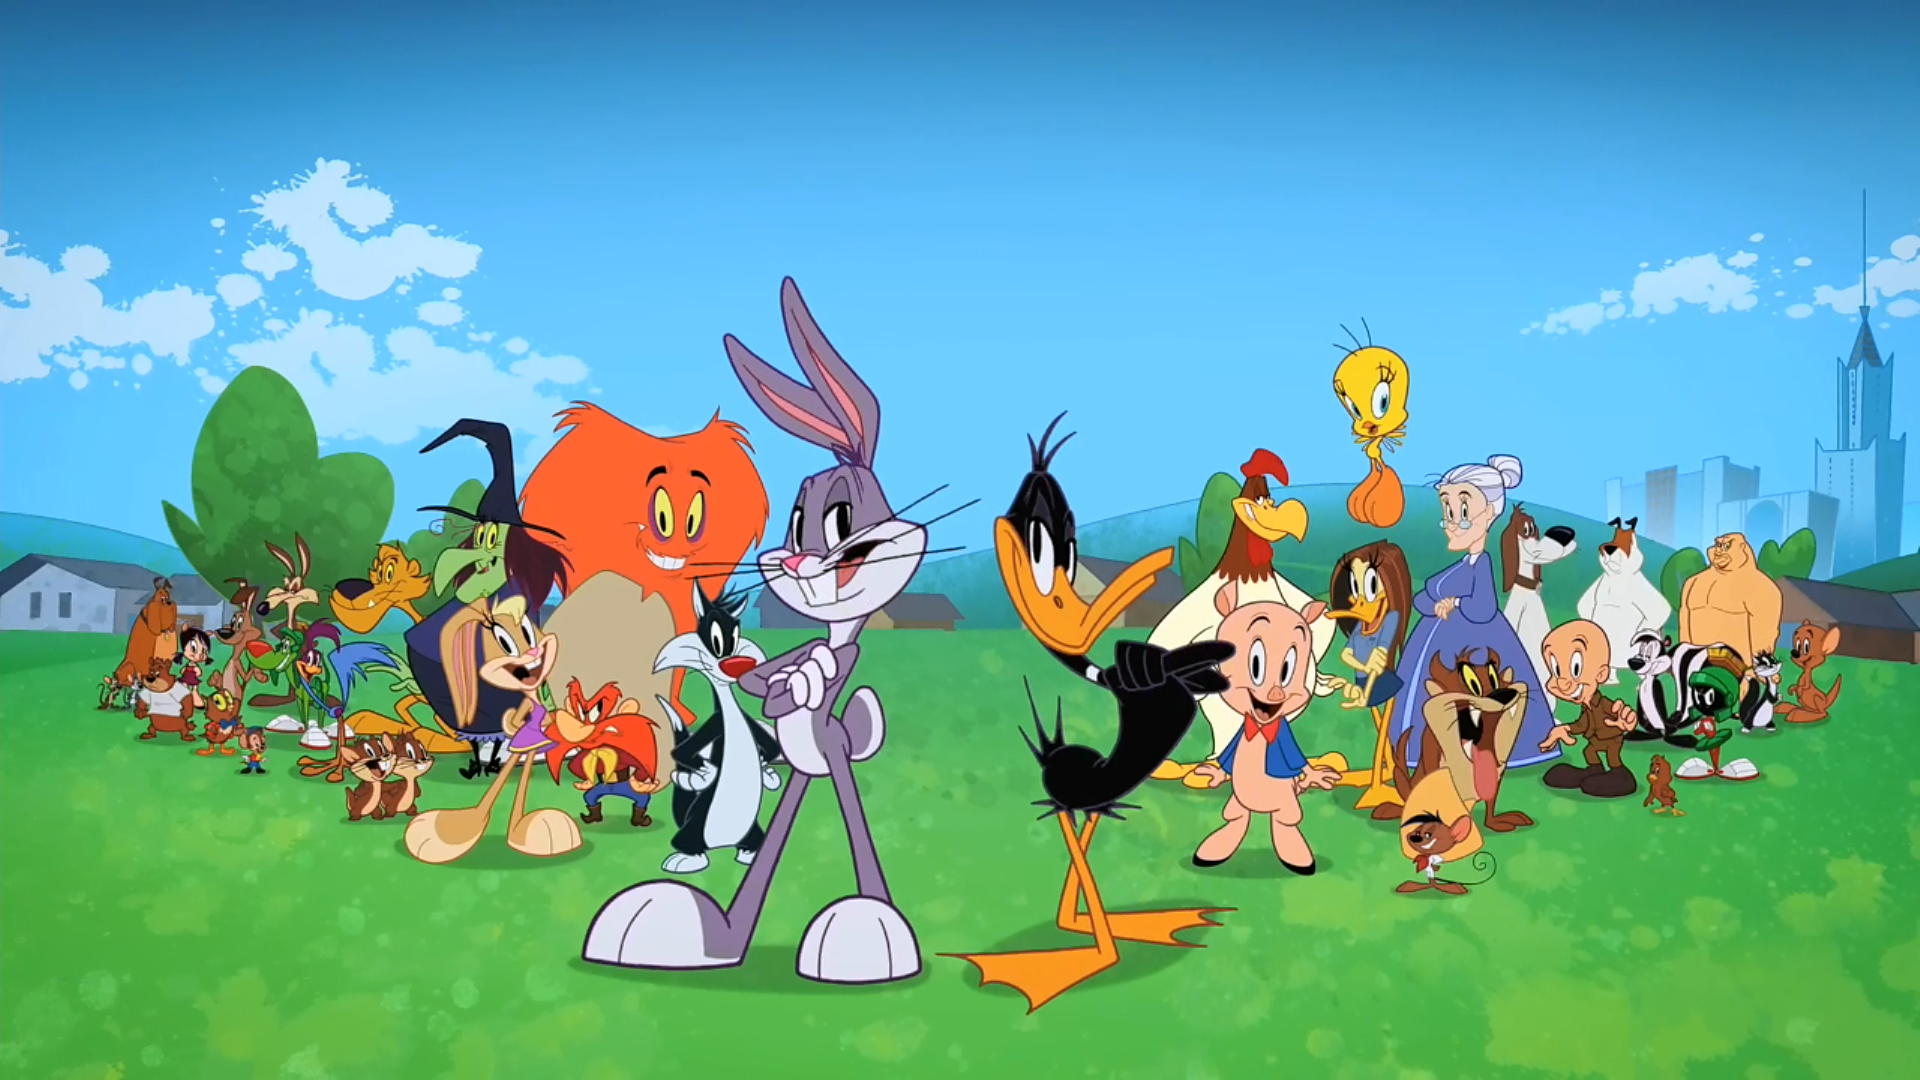 Looney Tunes Backgrounds (PC, Mobile, Gadgets) Compatible | 1920x1080